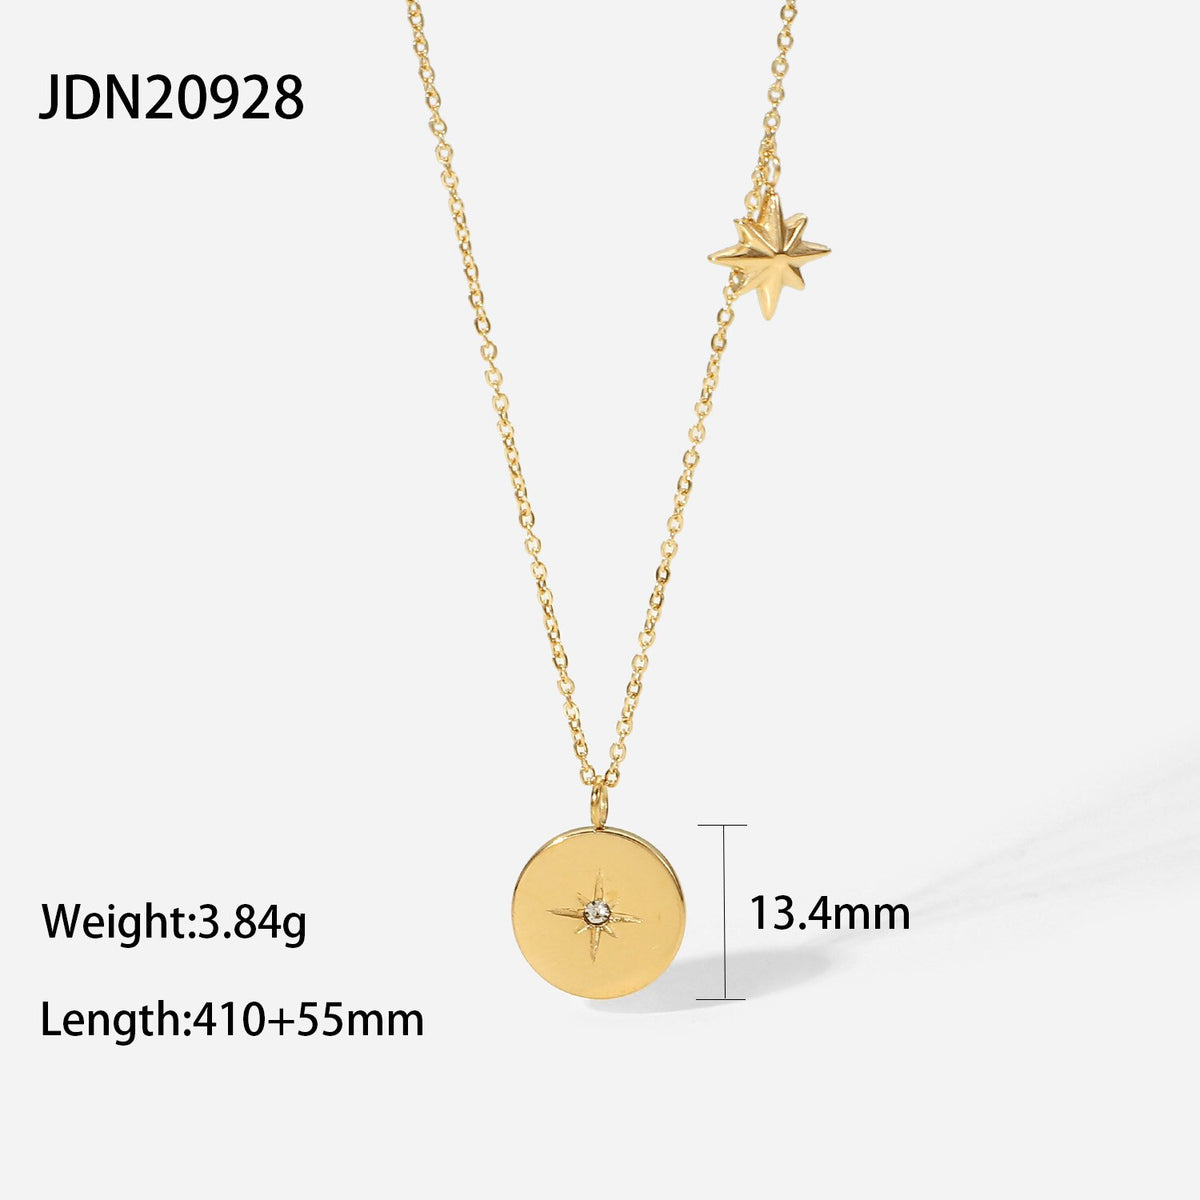 Cool Stainless Steel Necklace With Zircon 14K Gold Metal Cubic Zirconia Eight-pointed Star Medal Pendant Necklace Women Gift